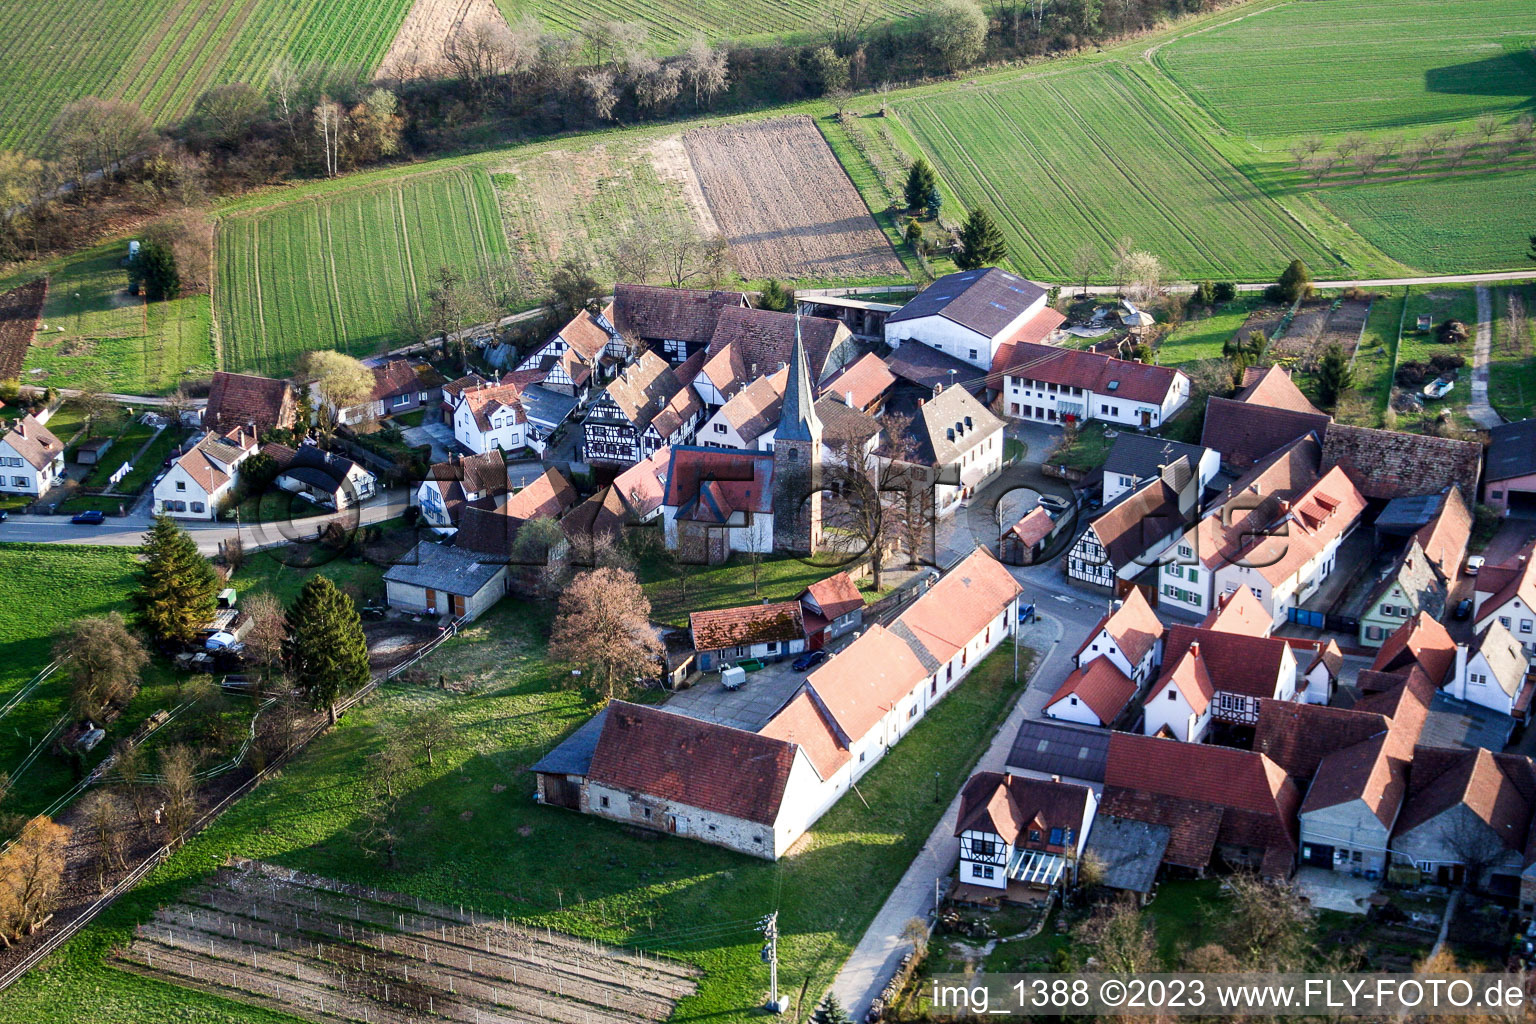 Aerial photograpy of Village - view on the edge of agricultural fields and farmland in the district Klingen in Heuchelheim-Klingen in the state Rhineland-Palatinate